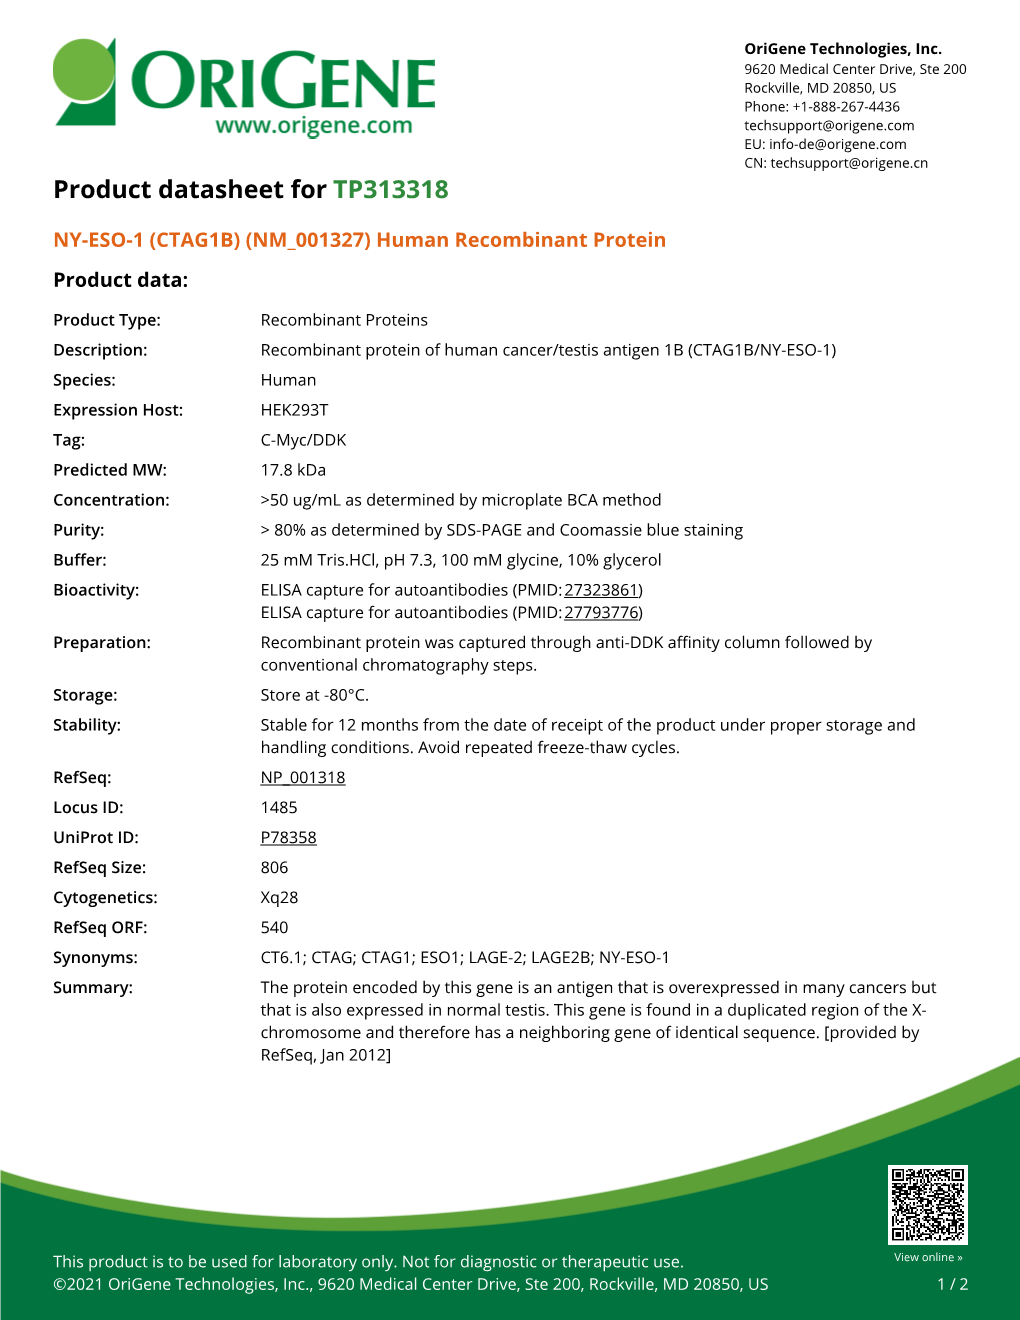 (CTAG1B) (NM 001327) Human Recombinant Protein Product Data